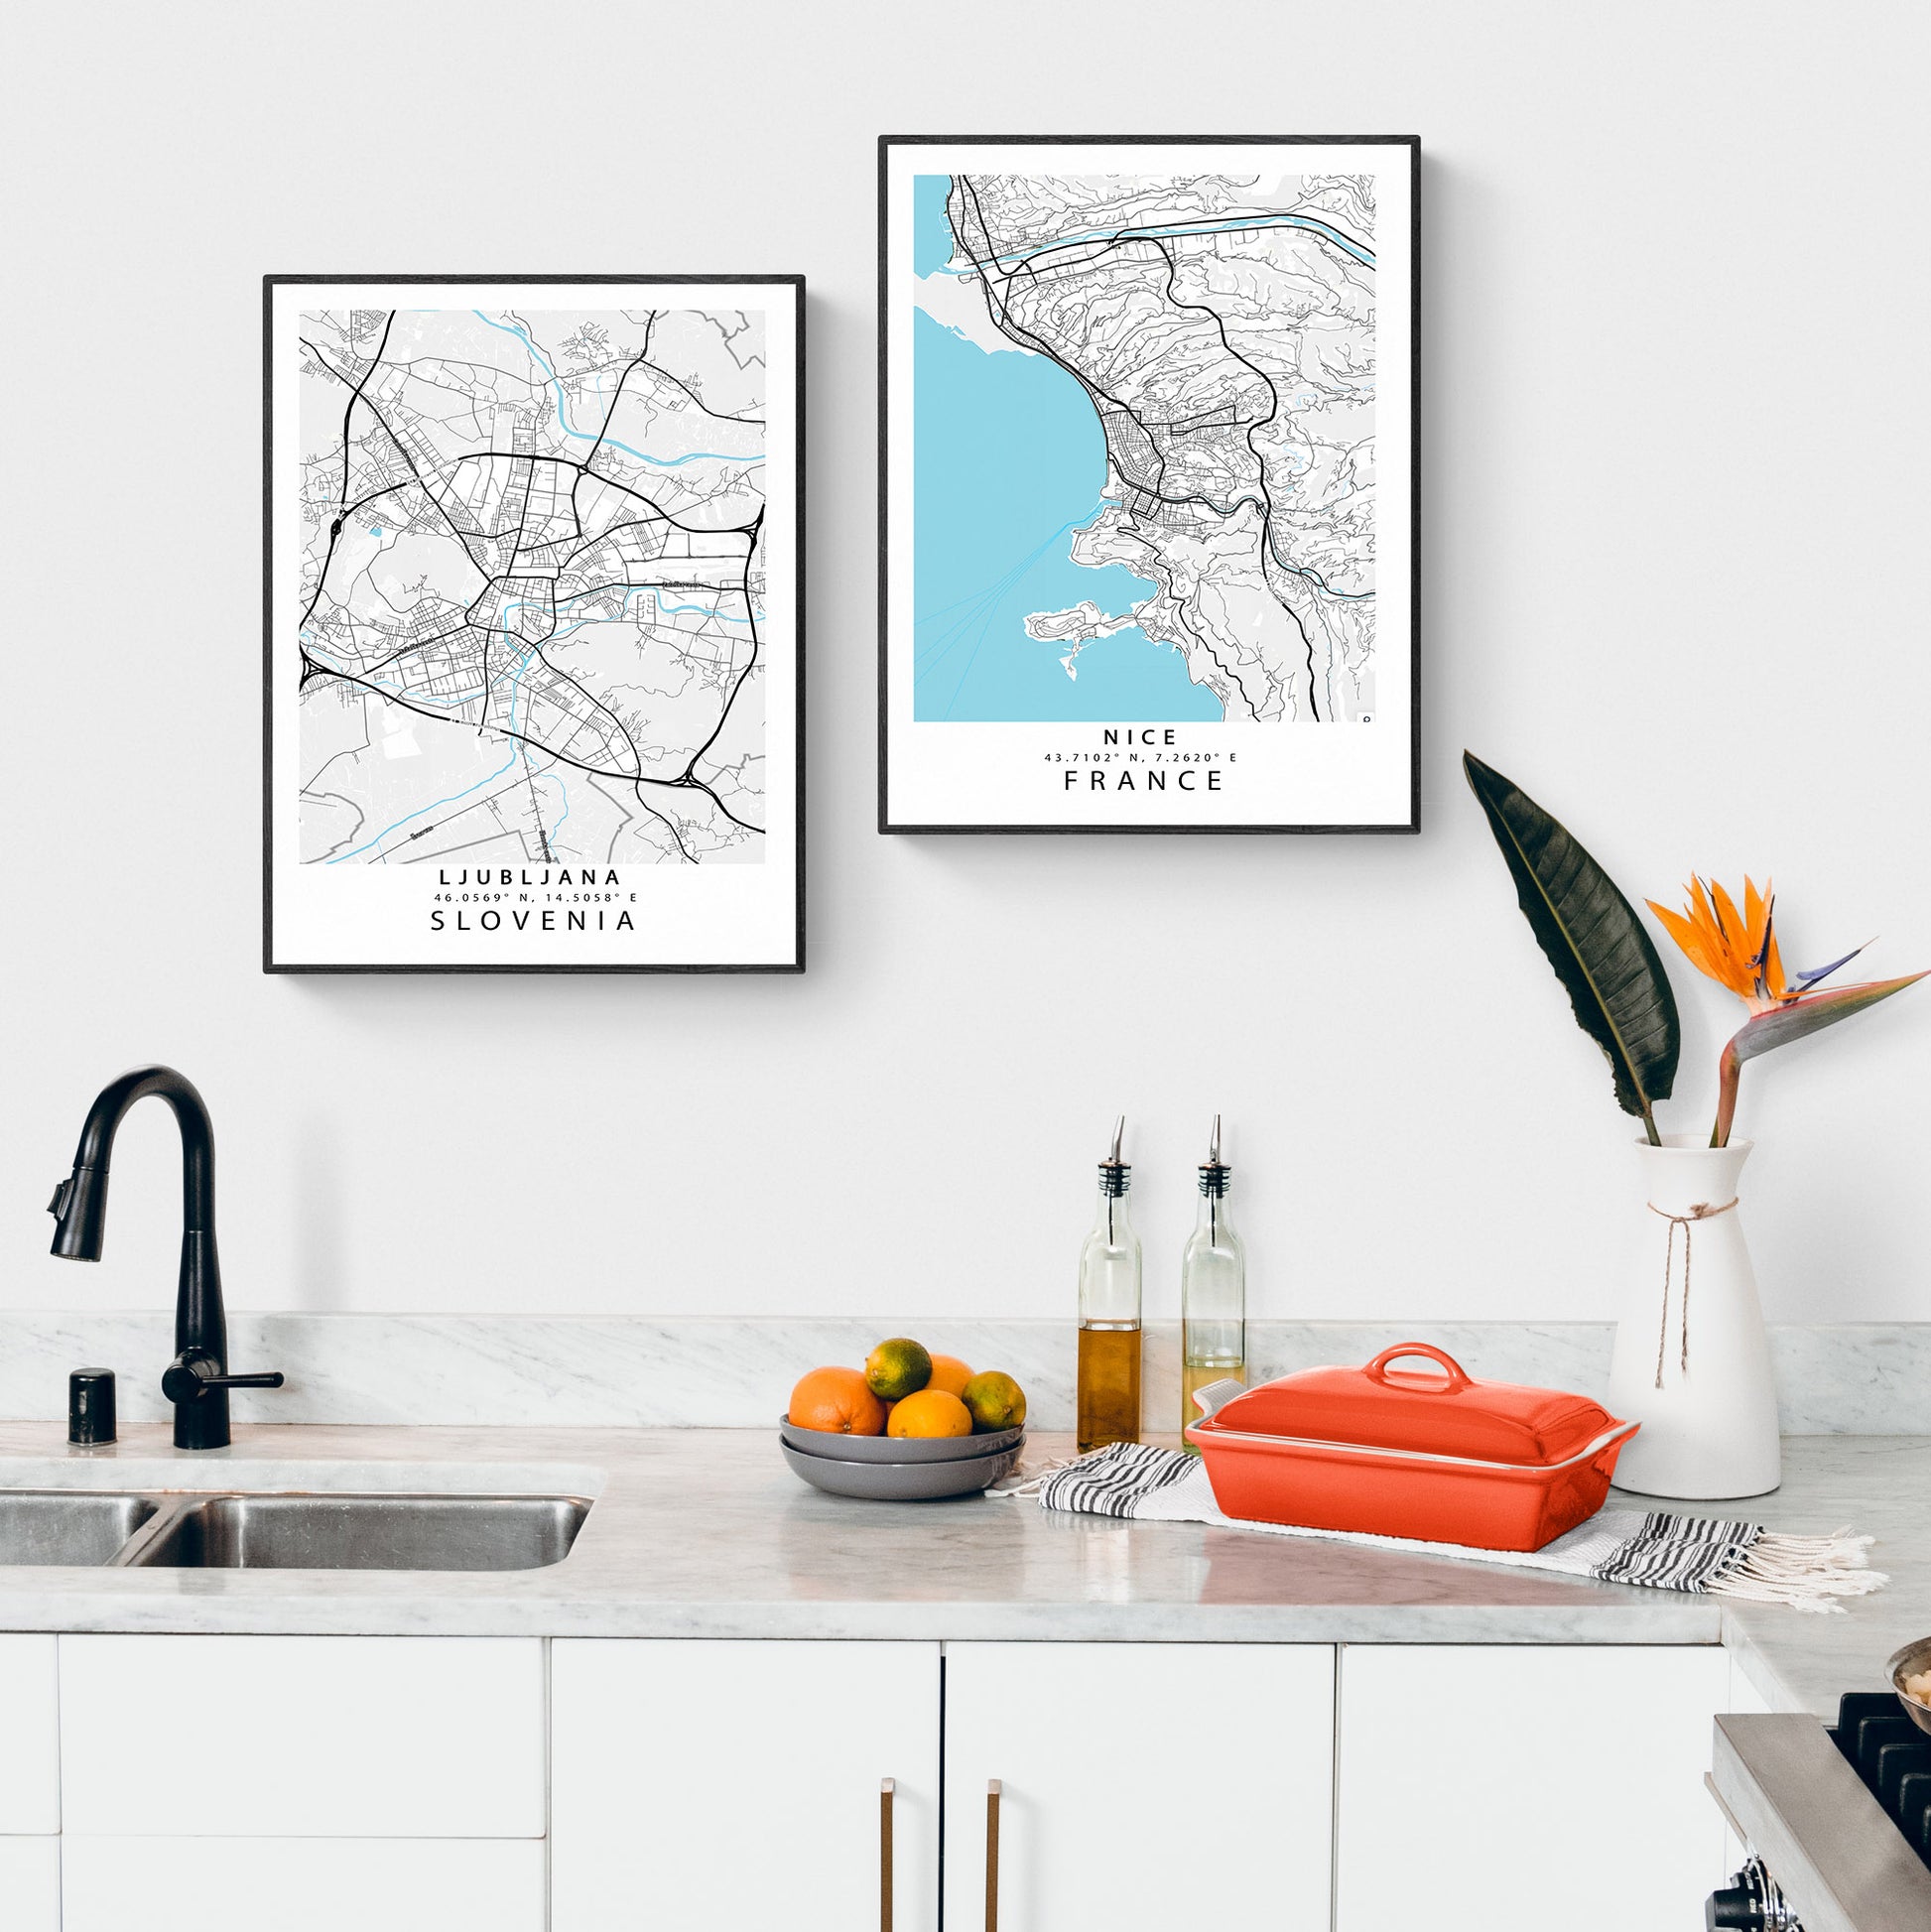 Show off your city-slicker style with these awesome Ljubljana Street Map Posters! Featuring custom map art prints, these city-inspired posters are sure to make your space look sharp and stylish. Add a little splash of wanderlust to your walls - because who needs plain old paint when you’ve got an awesome poster of your favorite street maps!